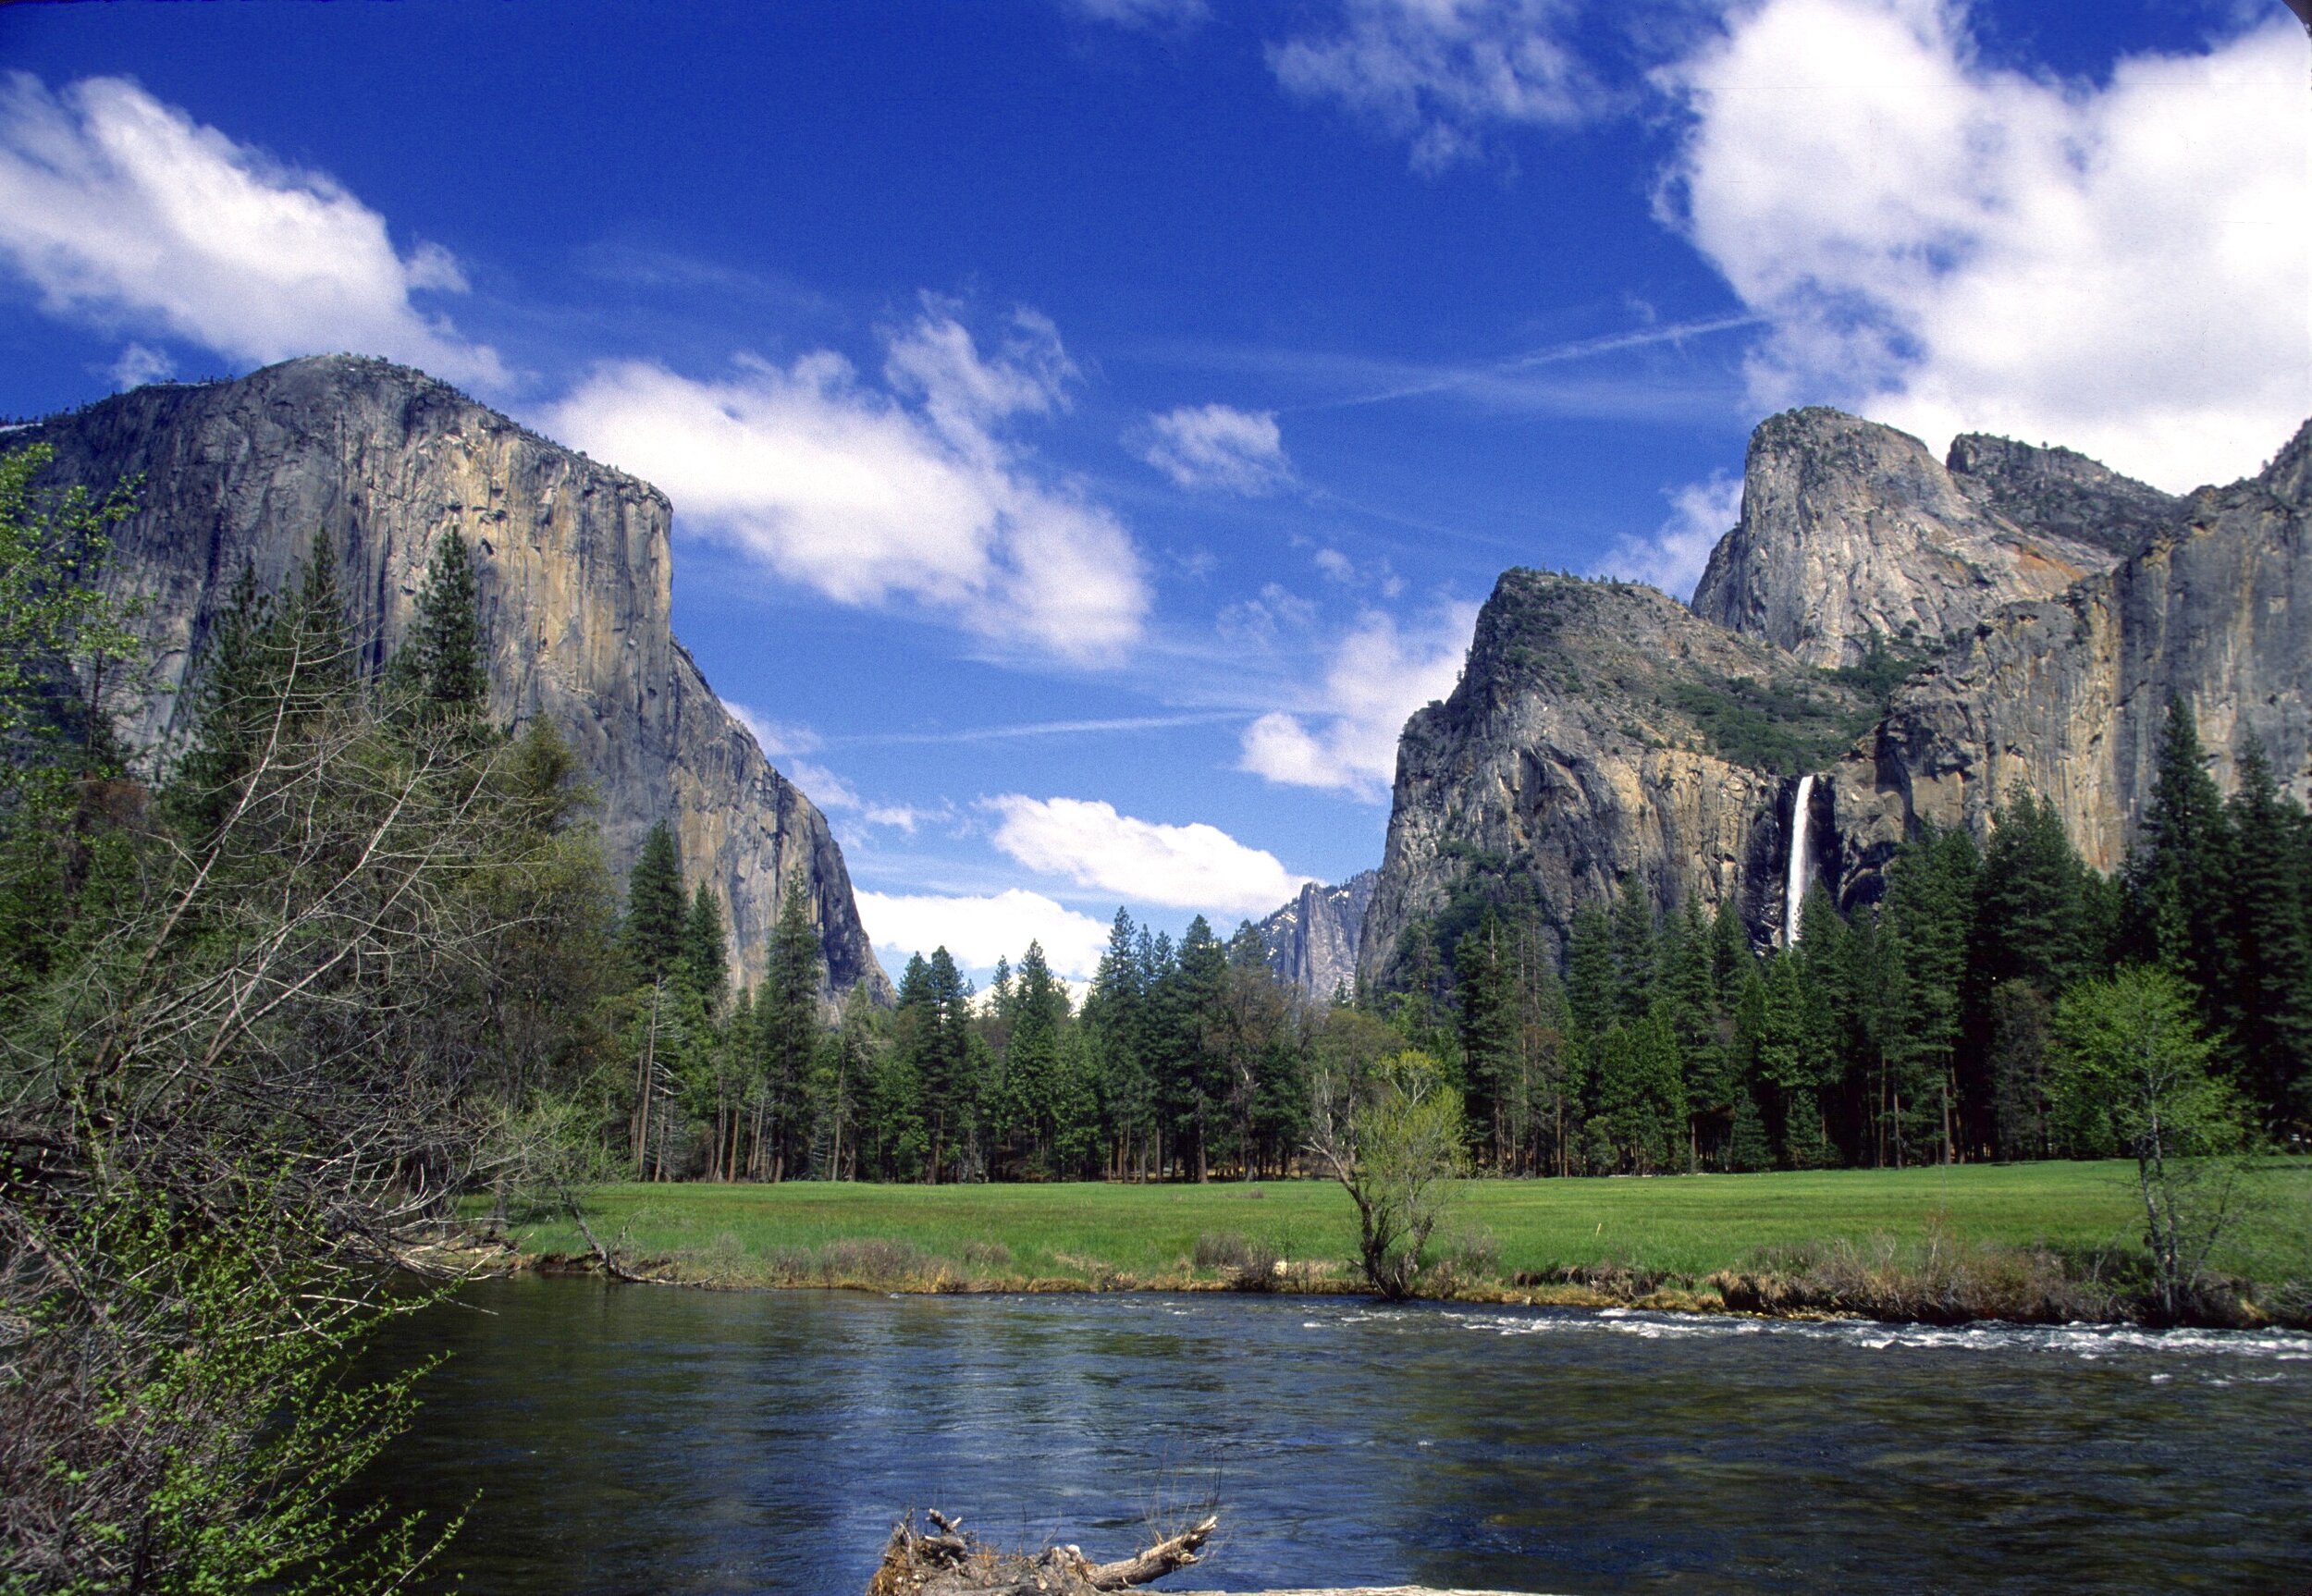 The strikingly beautiful Yosemite Valley is one of the most iconic views in all the National Parks.